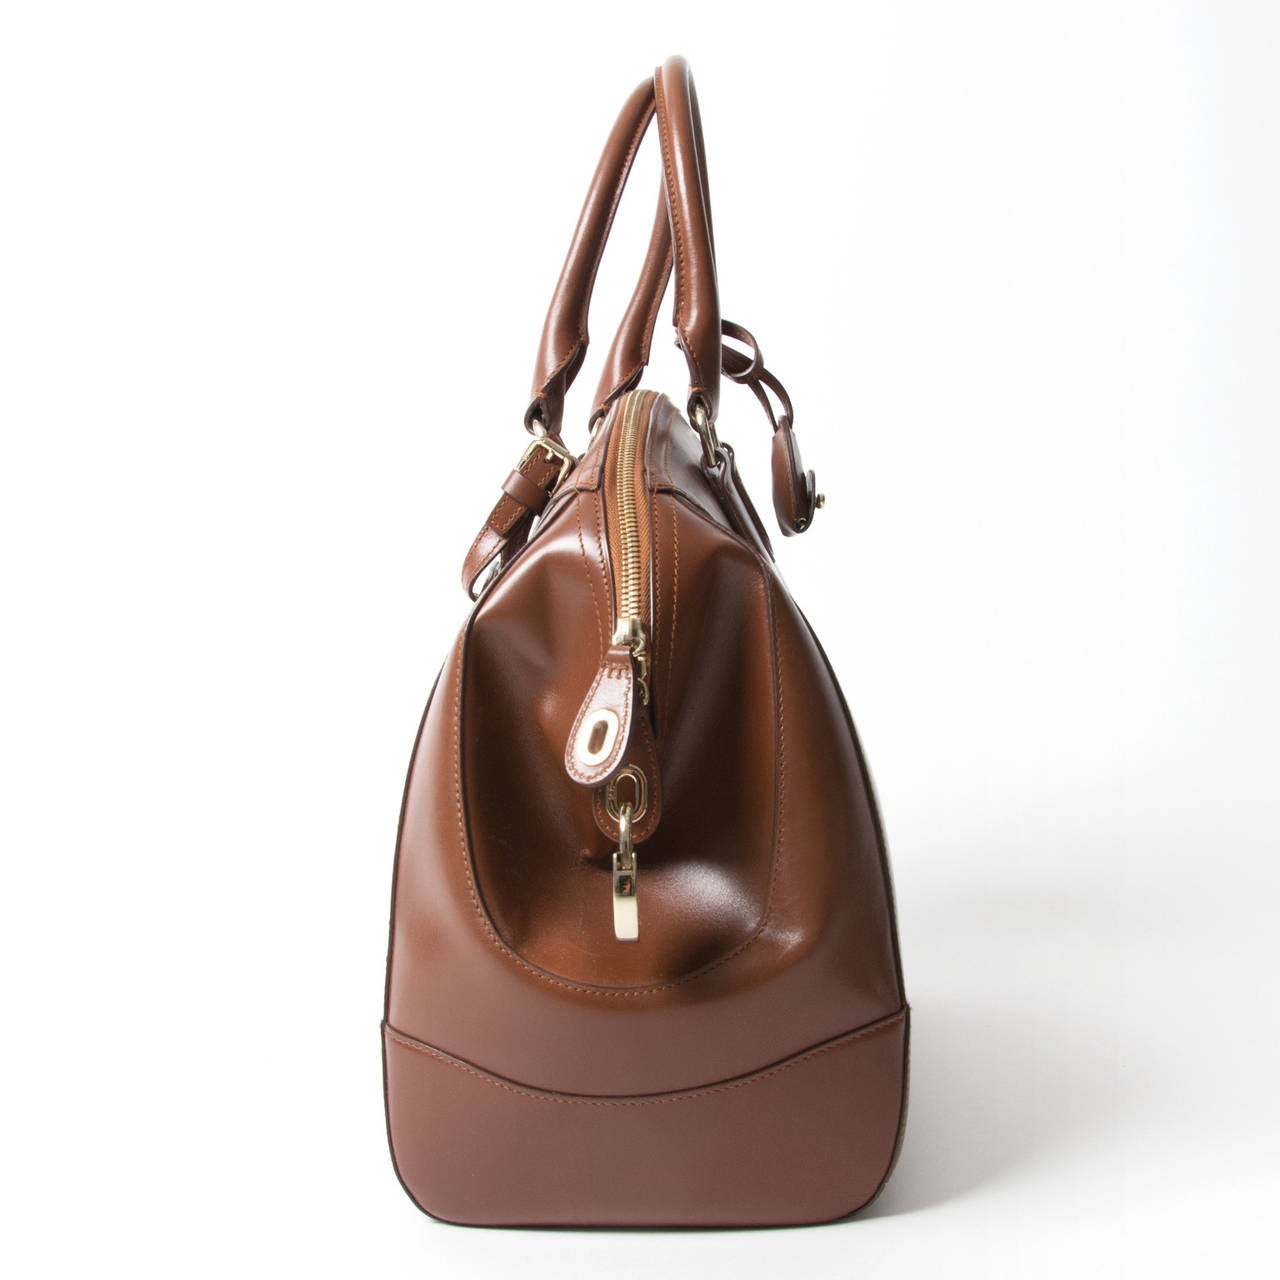 Ralph Lauren is known for offering ultimate luxury, which is also the case with this brown small Bedford bag.

This effortless but chic bag is the favorite of many celebrities, such as Angelina Jolie. The brown leather looks good with every